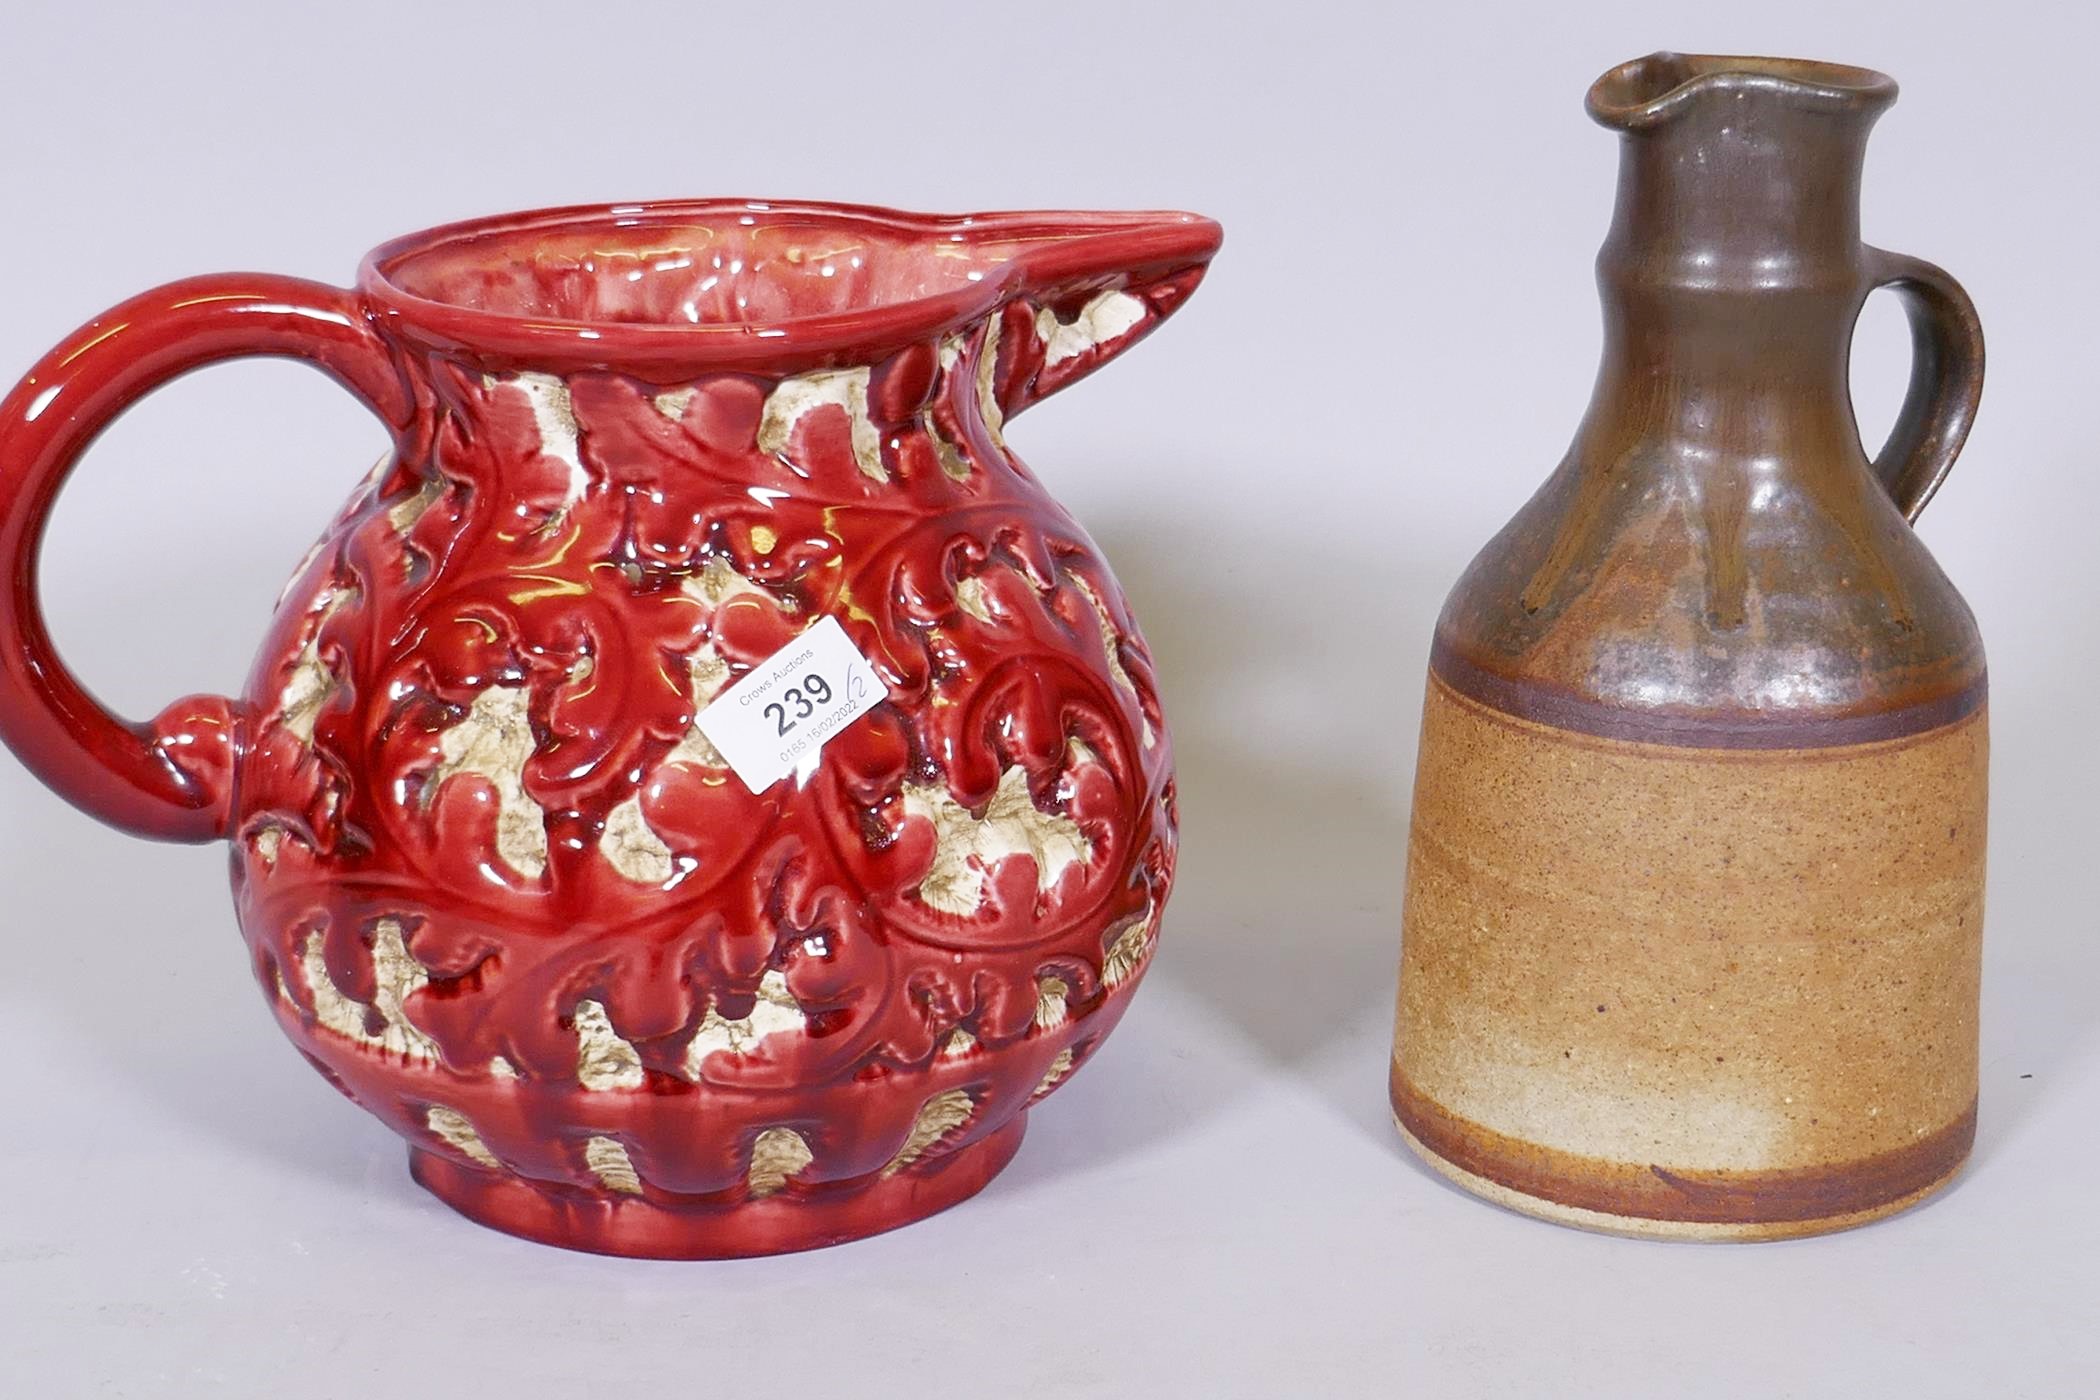 Trentham majolica jug with raised foliate design, glazed in red, 9" high, and a studio pottery